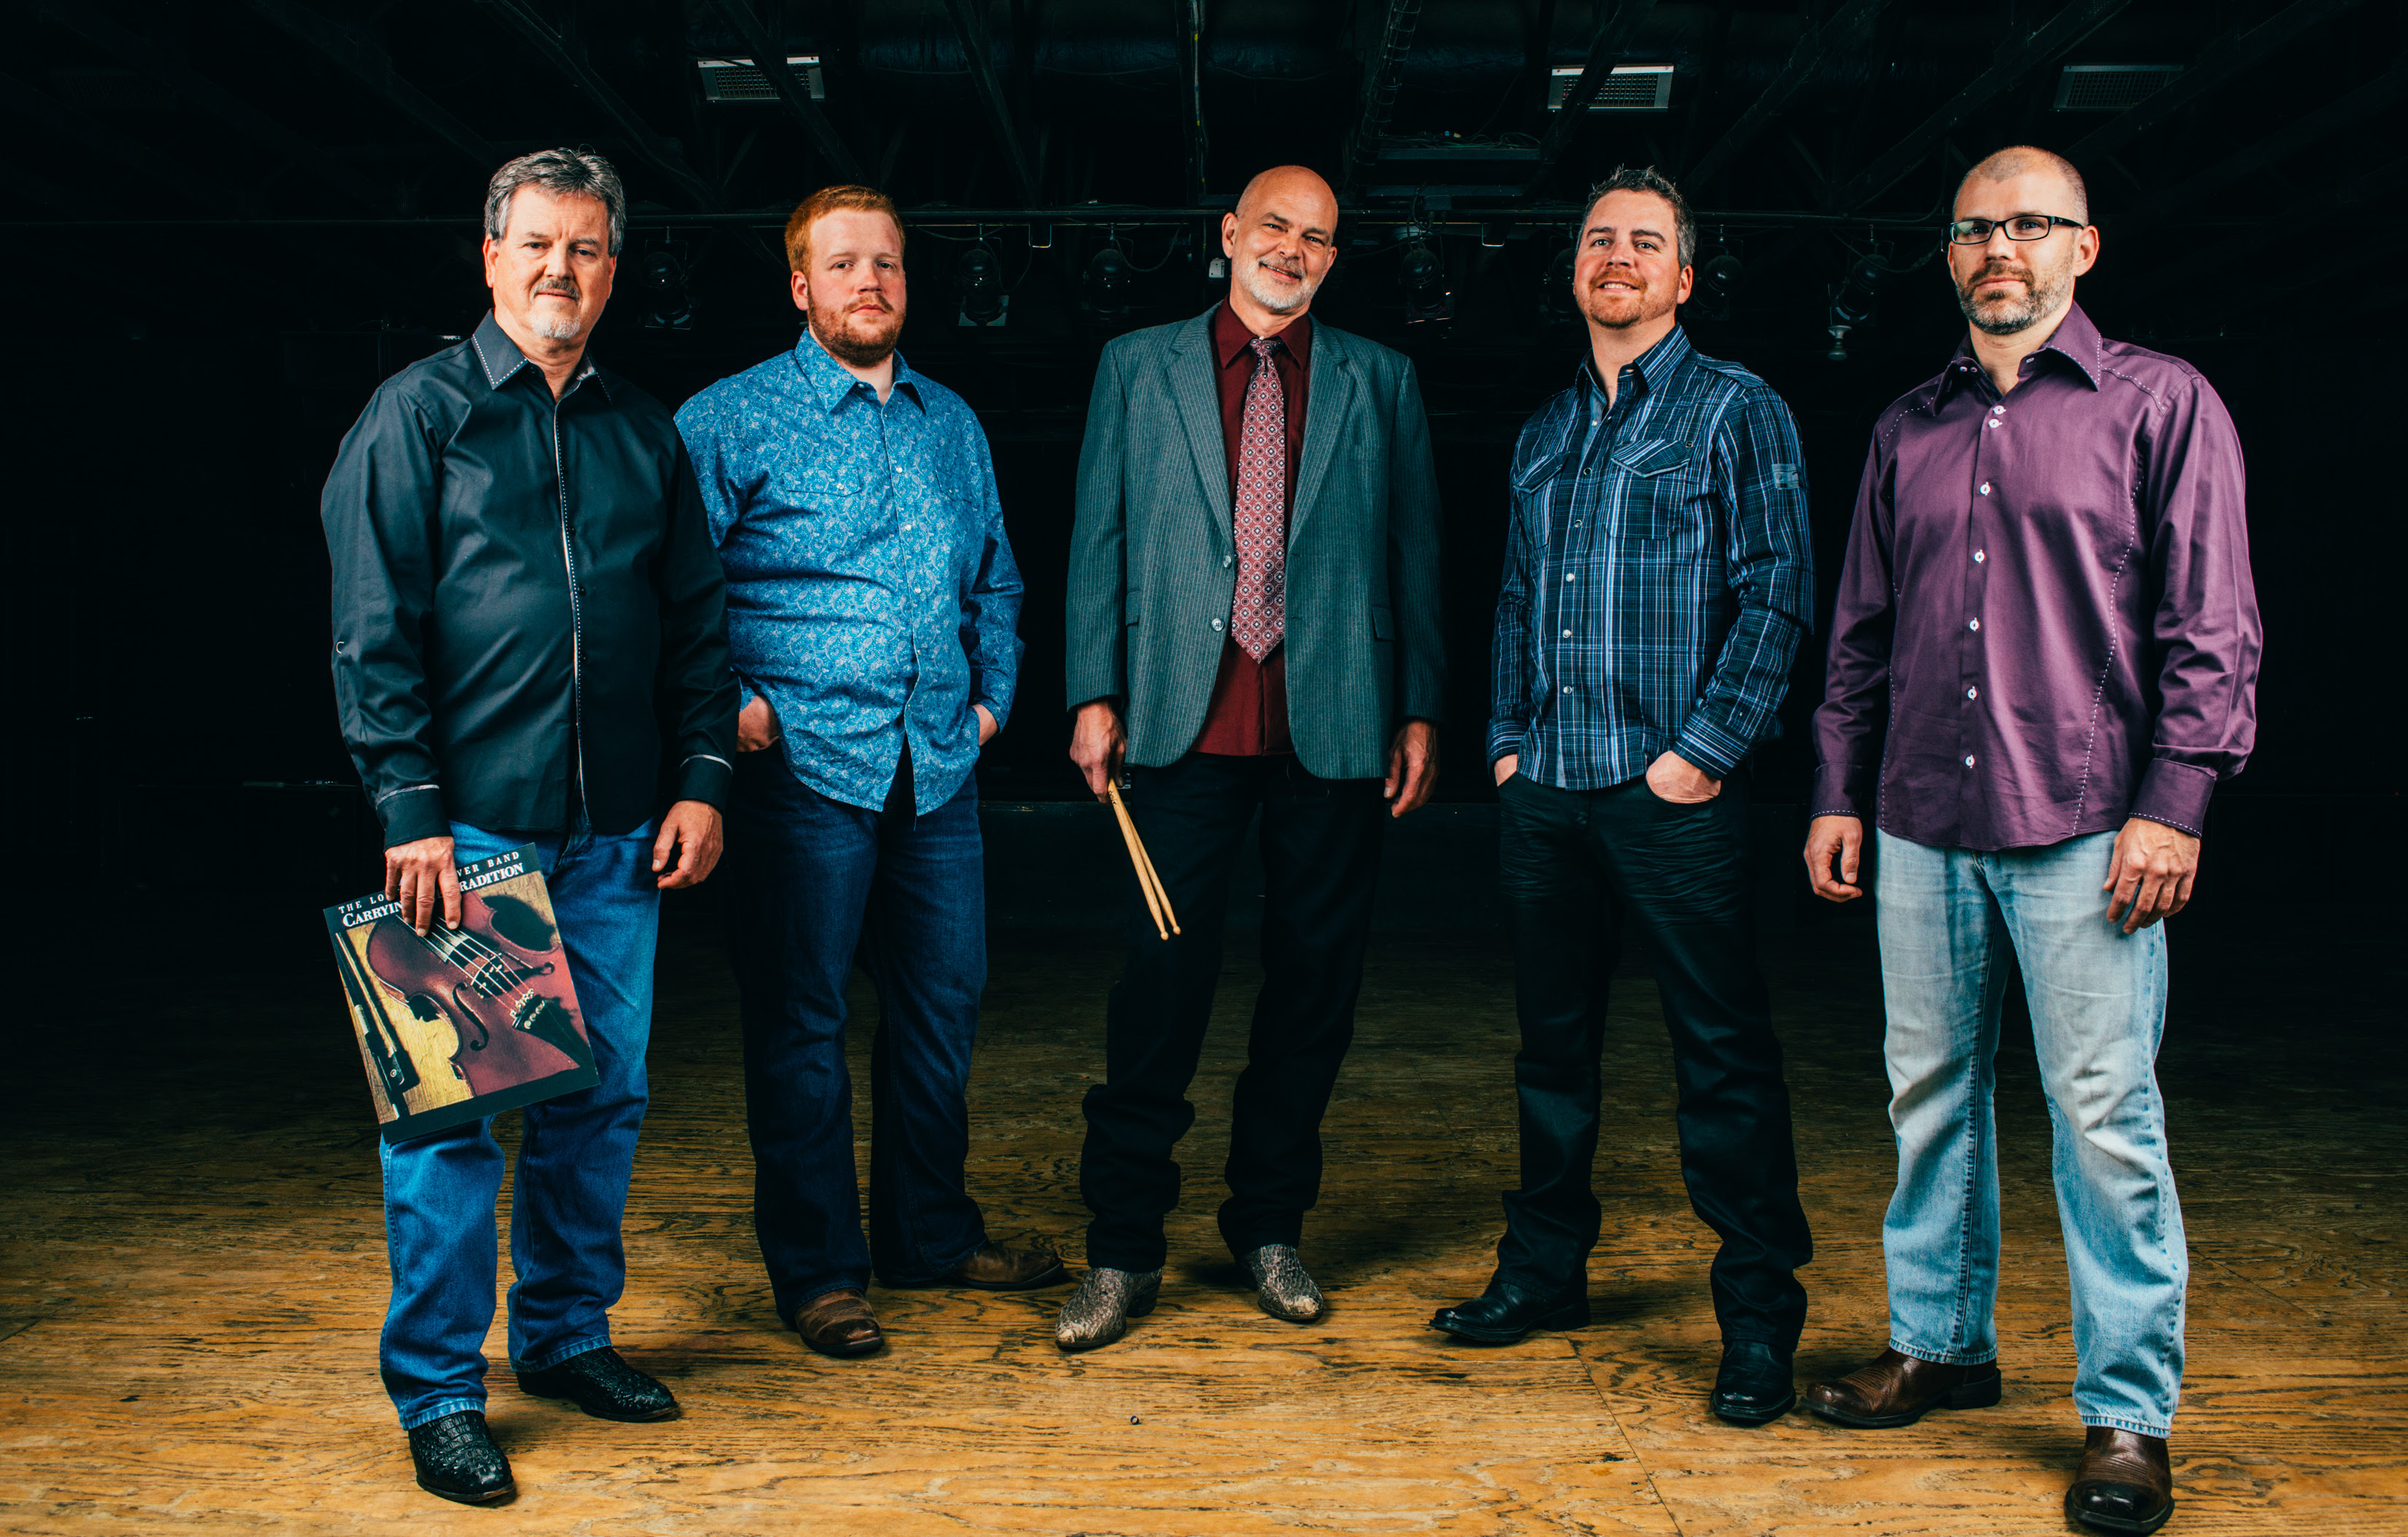 Lonesome River Band to Host 16th Annual Rudy Fest Bluegrass Festival